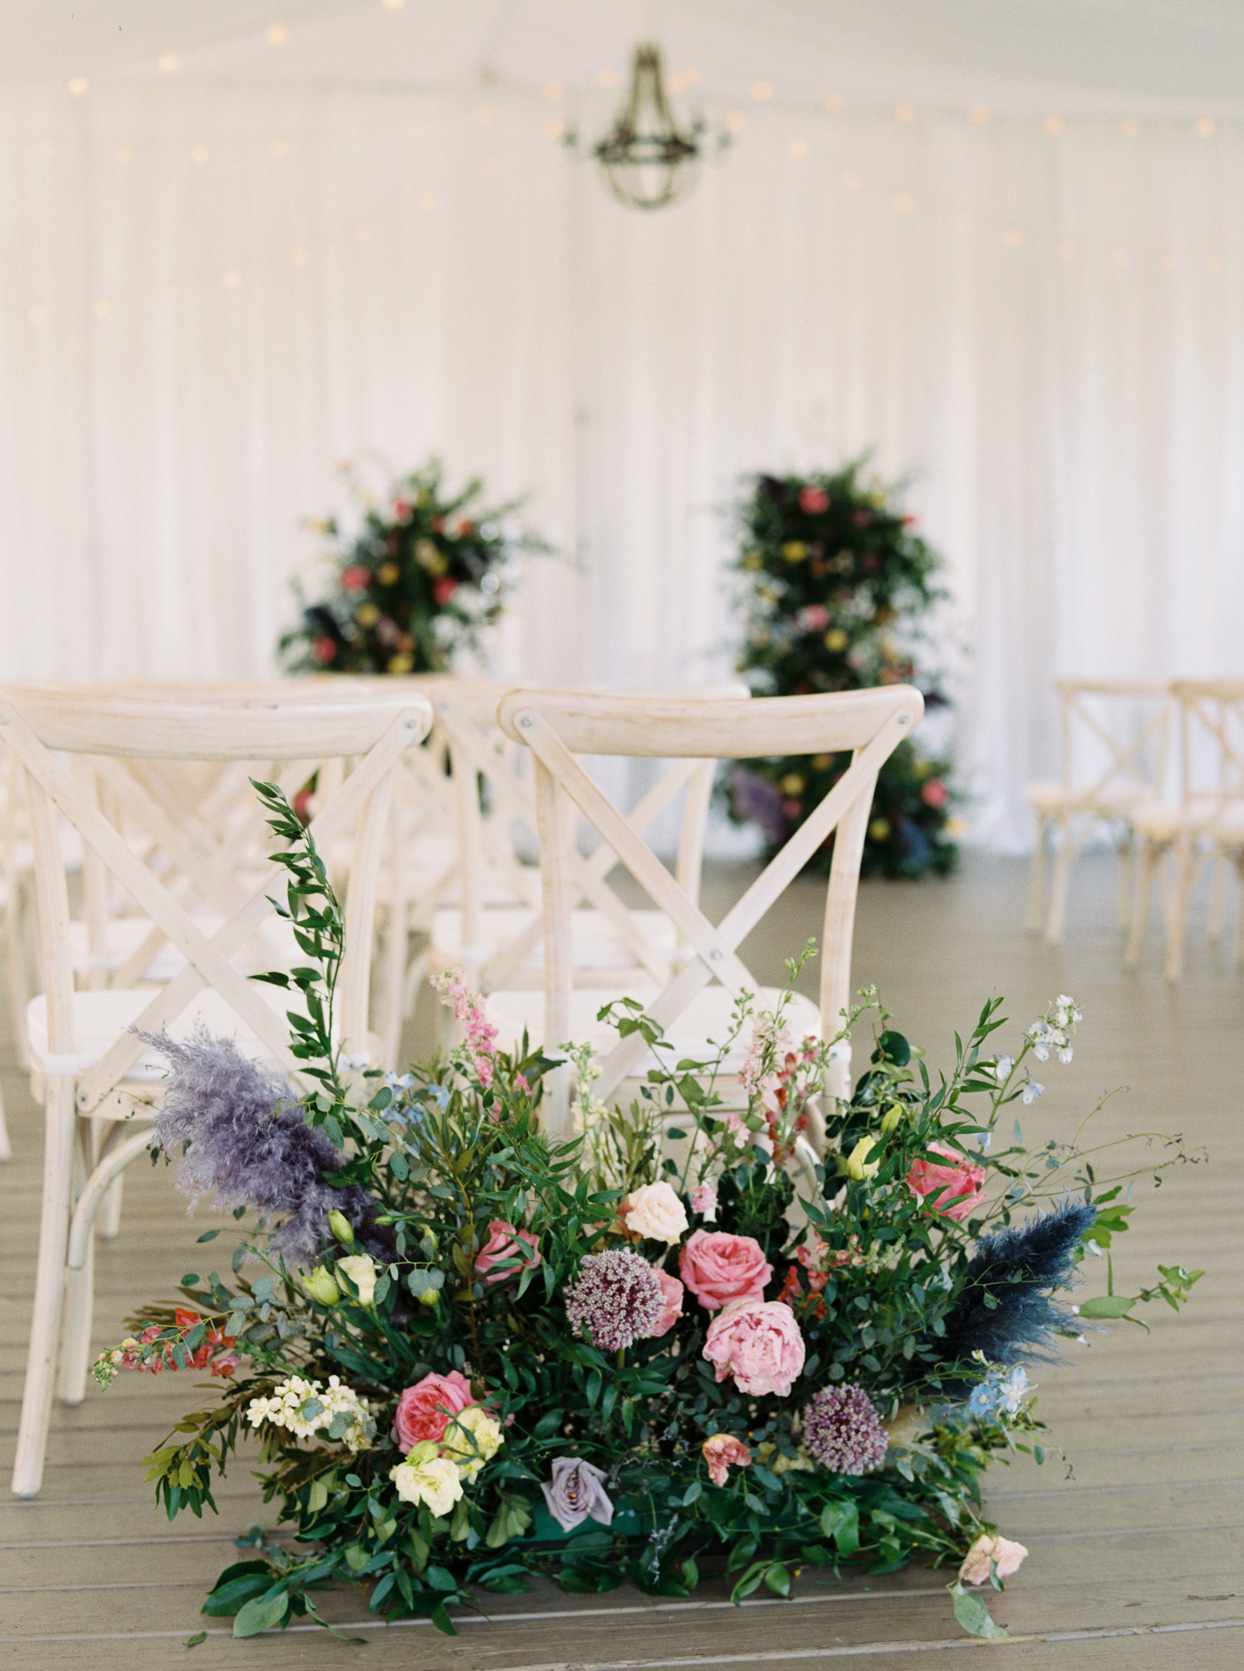 wedding ceremony aisle markers comprised of colorful flowers and greenery